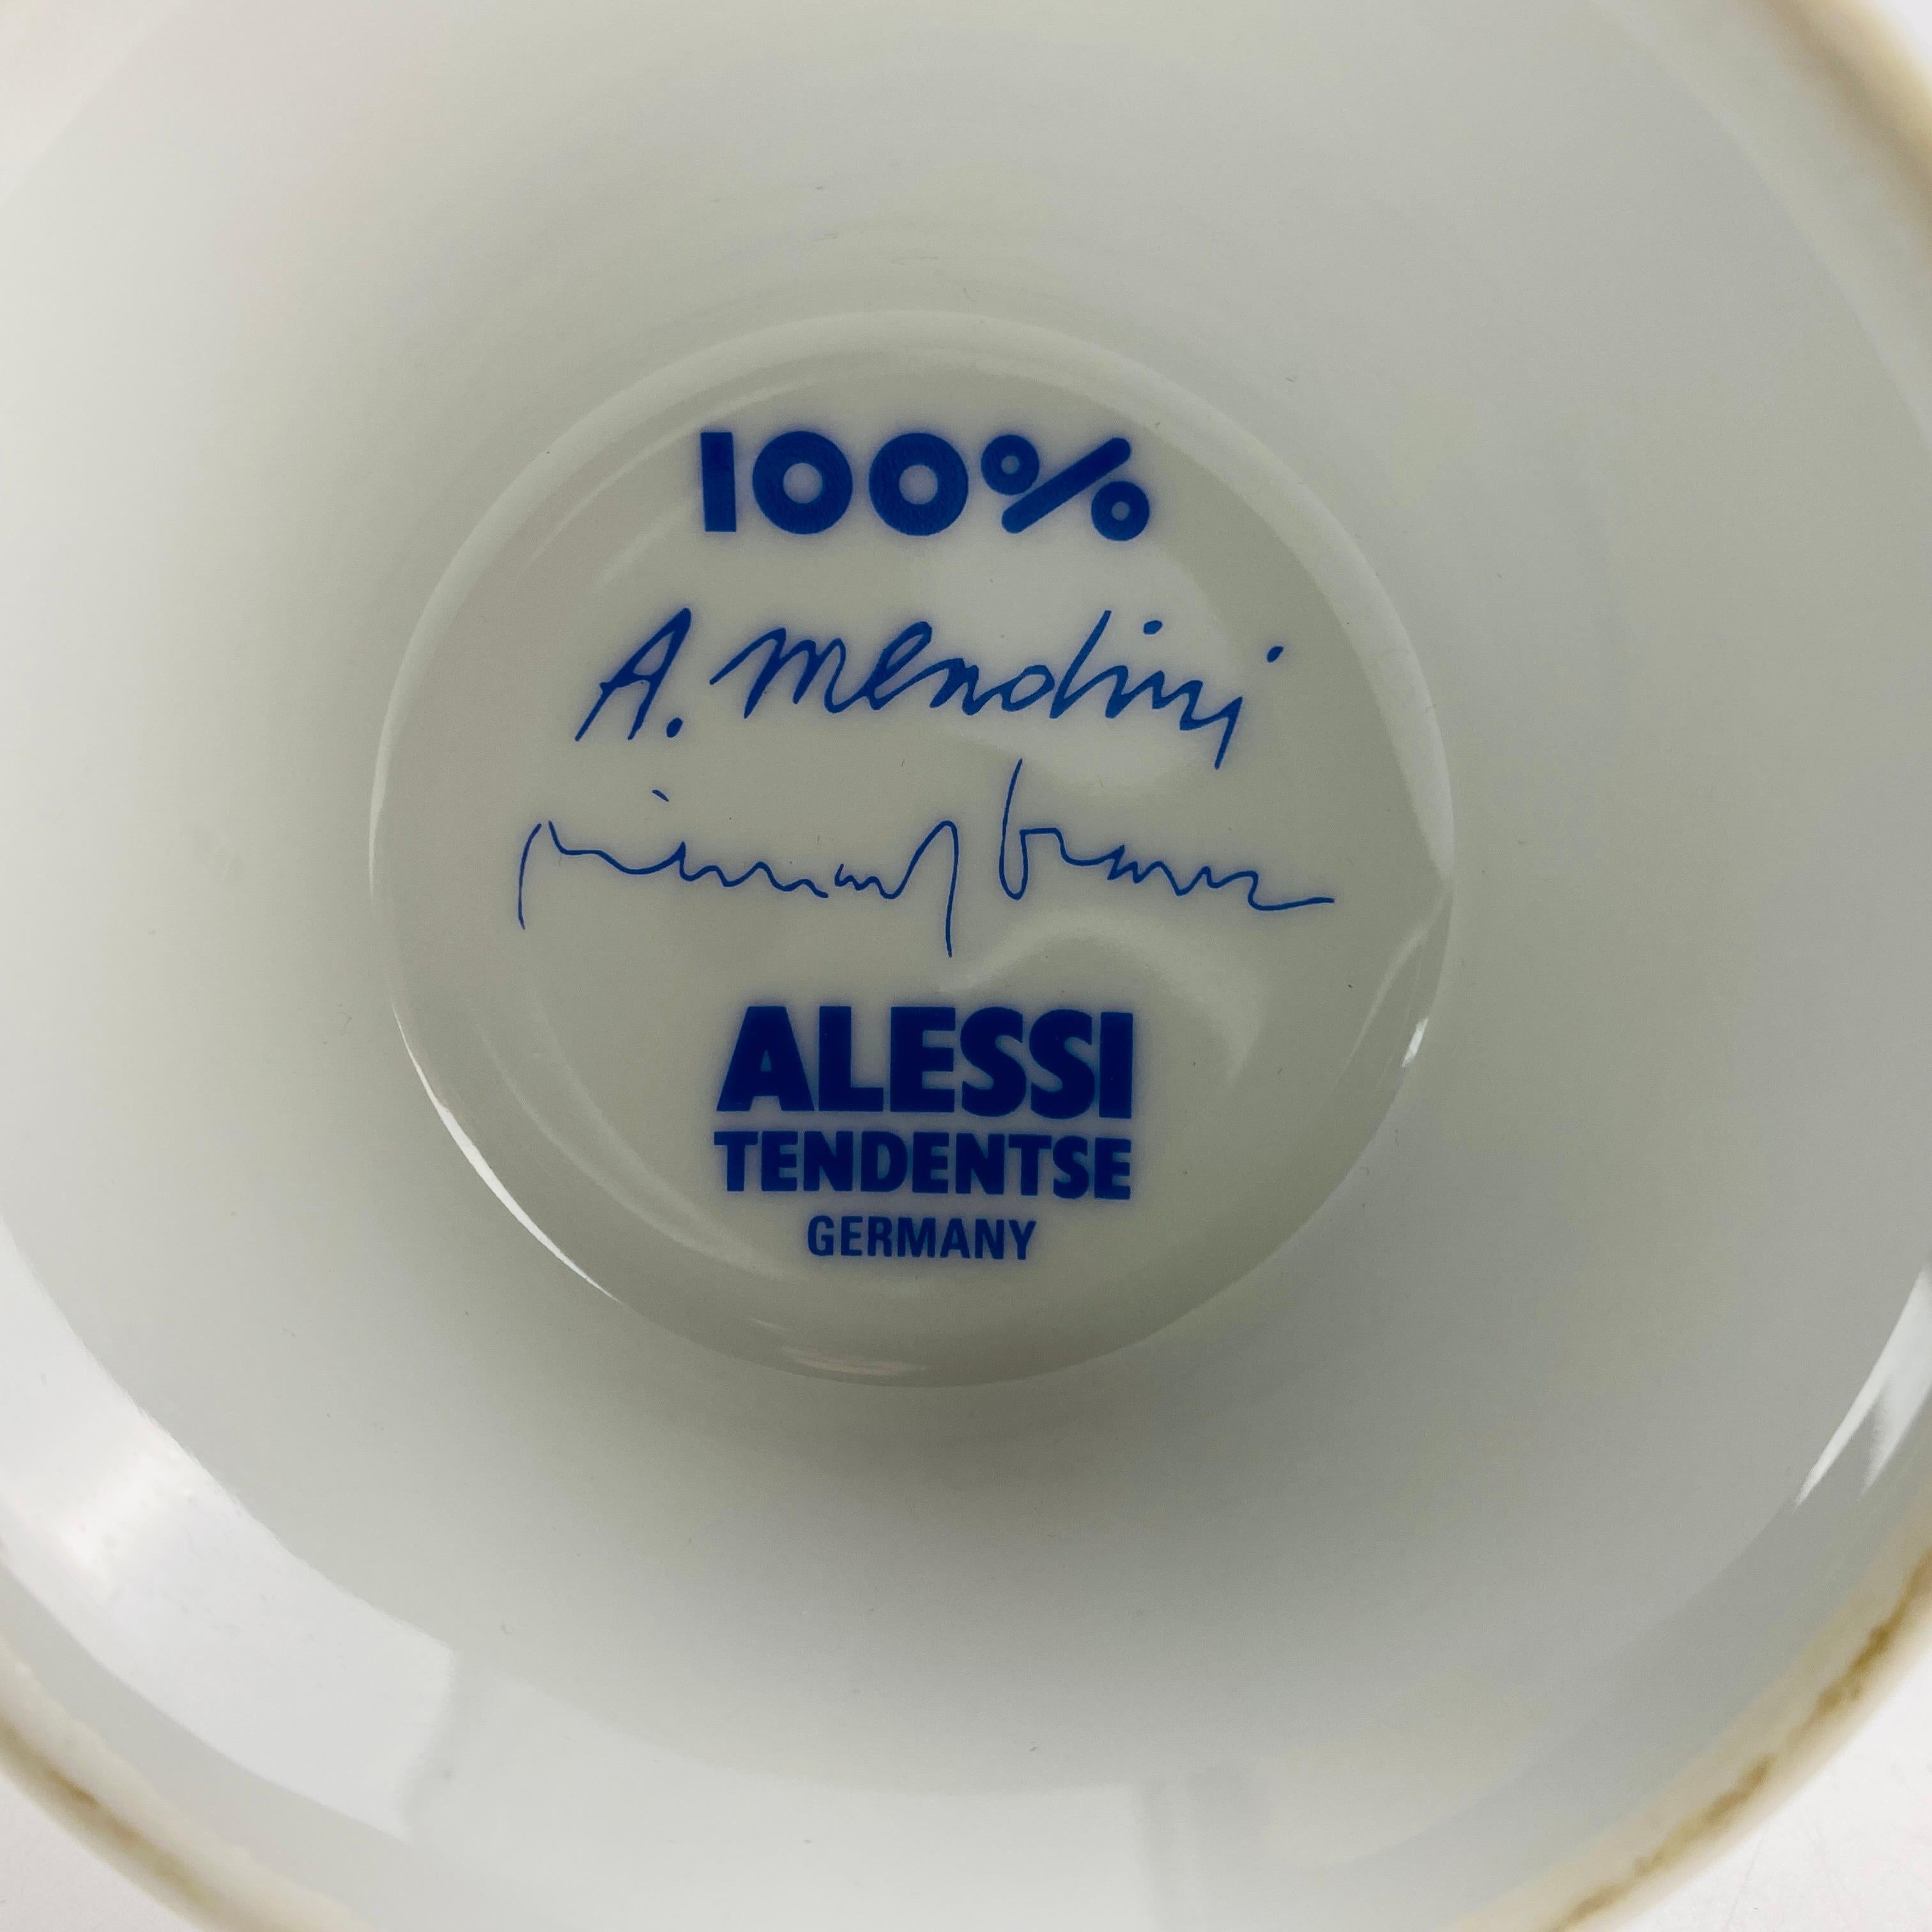 Alessi Tendentse Vase by Michael Graves for Alessandro Mendini 100% Make-up N32 4